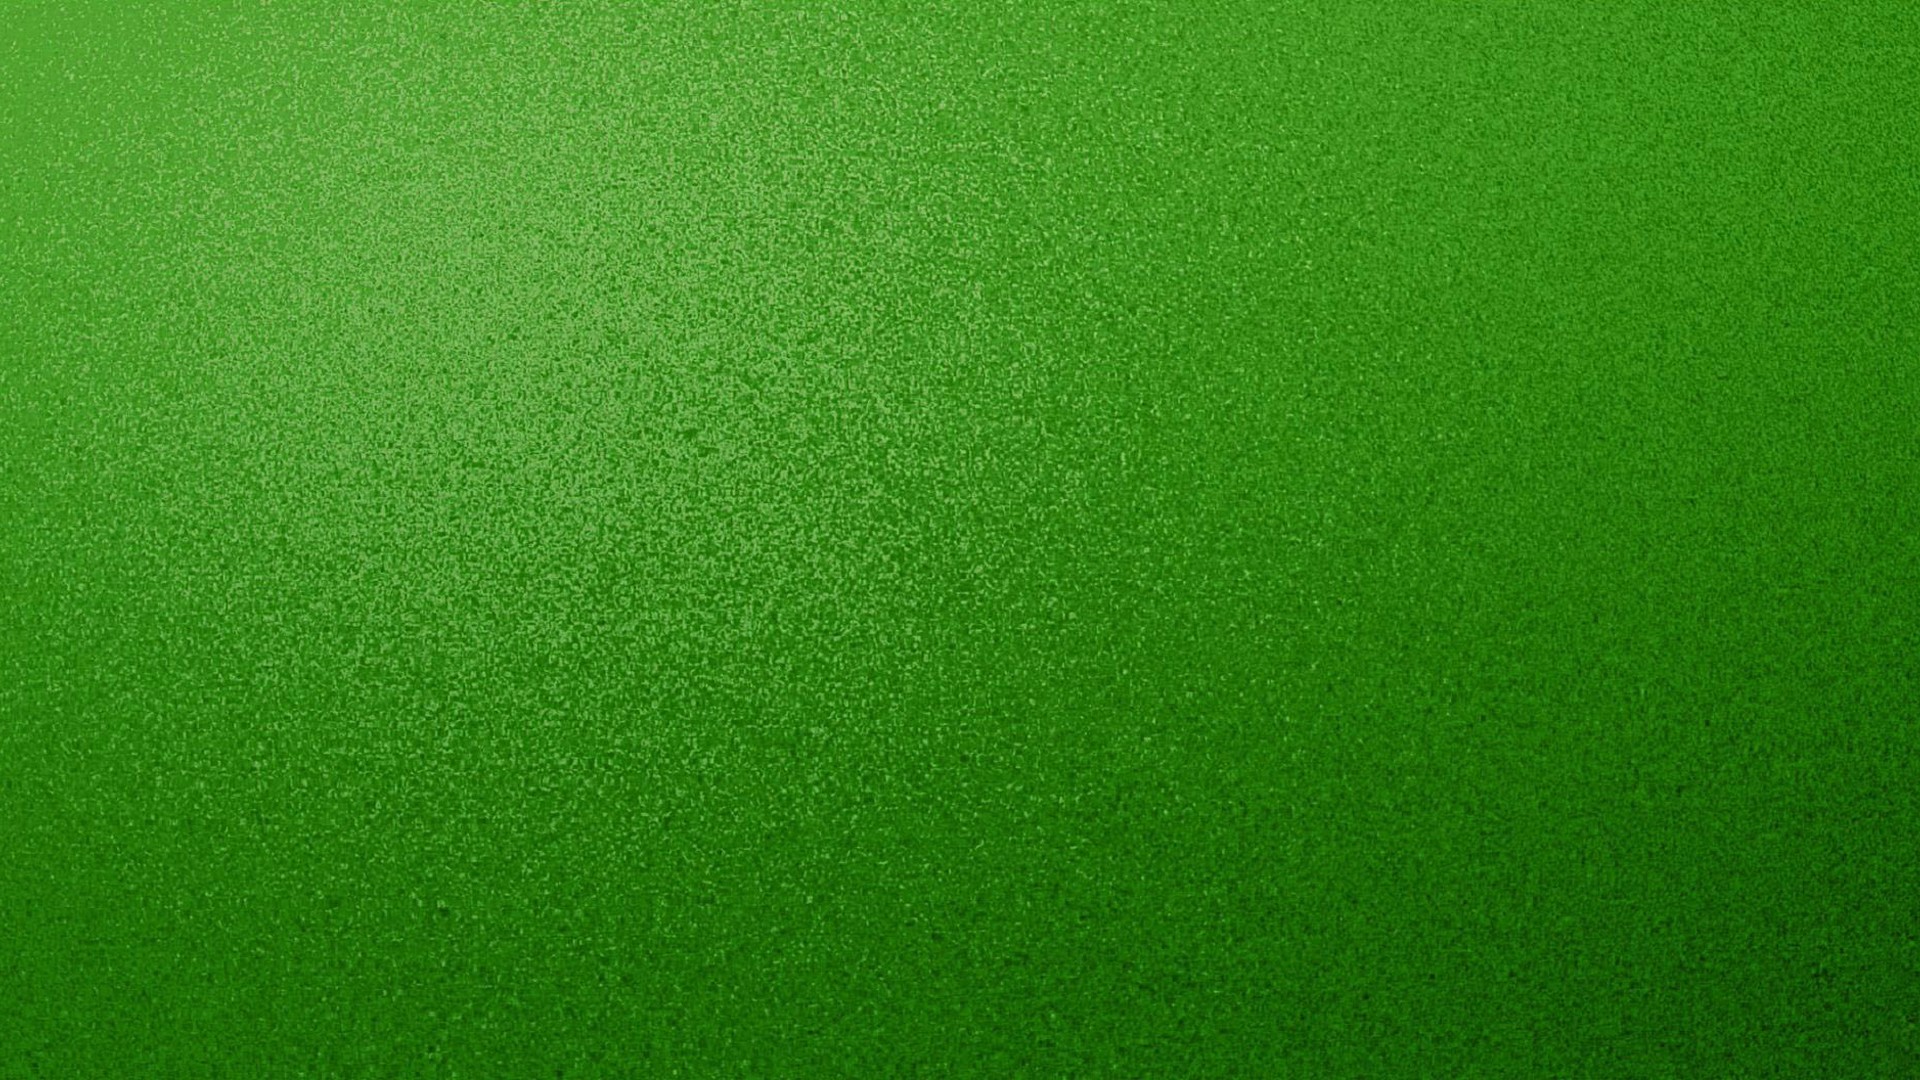 HD Wallpaper Green with image resolution 1920x1080 pixel. You can make this wallpaper for your Desktop Computer Backgrounds, Mac Wallpapers, Android Lock screen or iPhone Screensavers